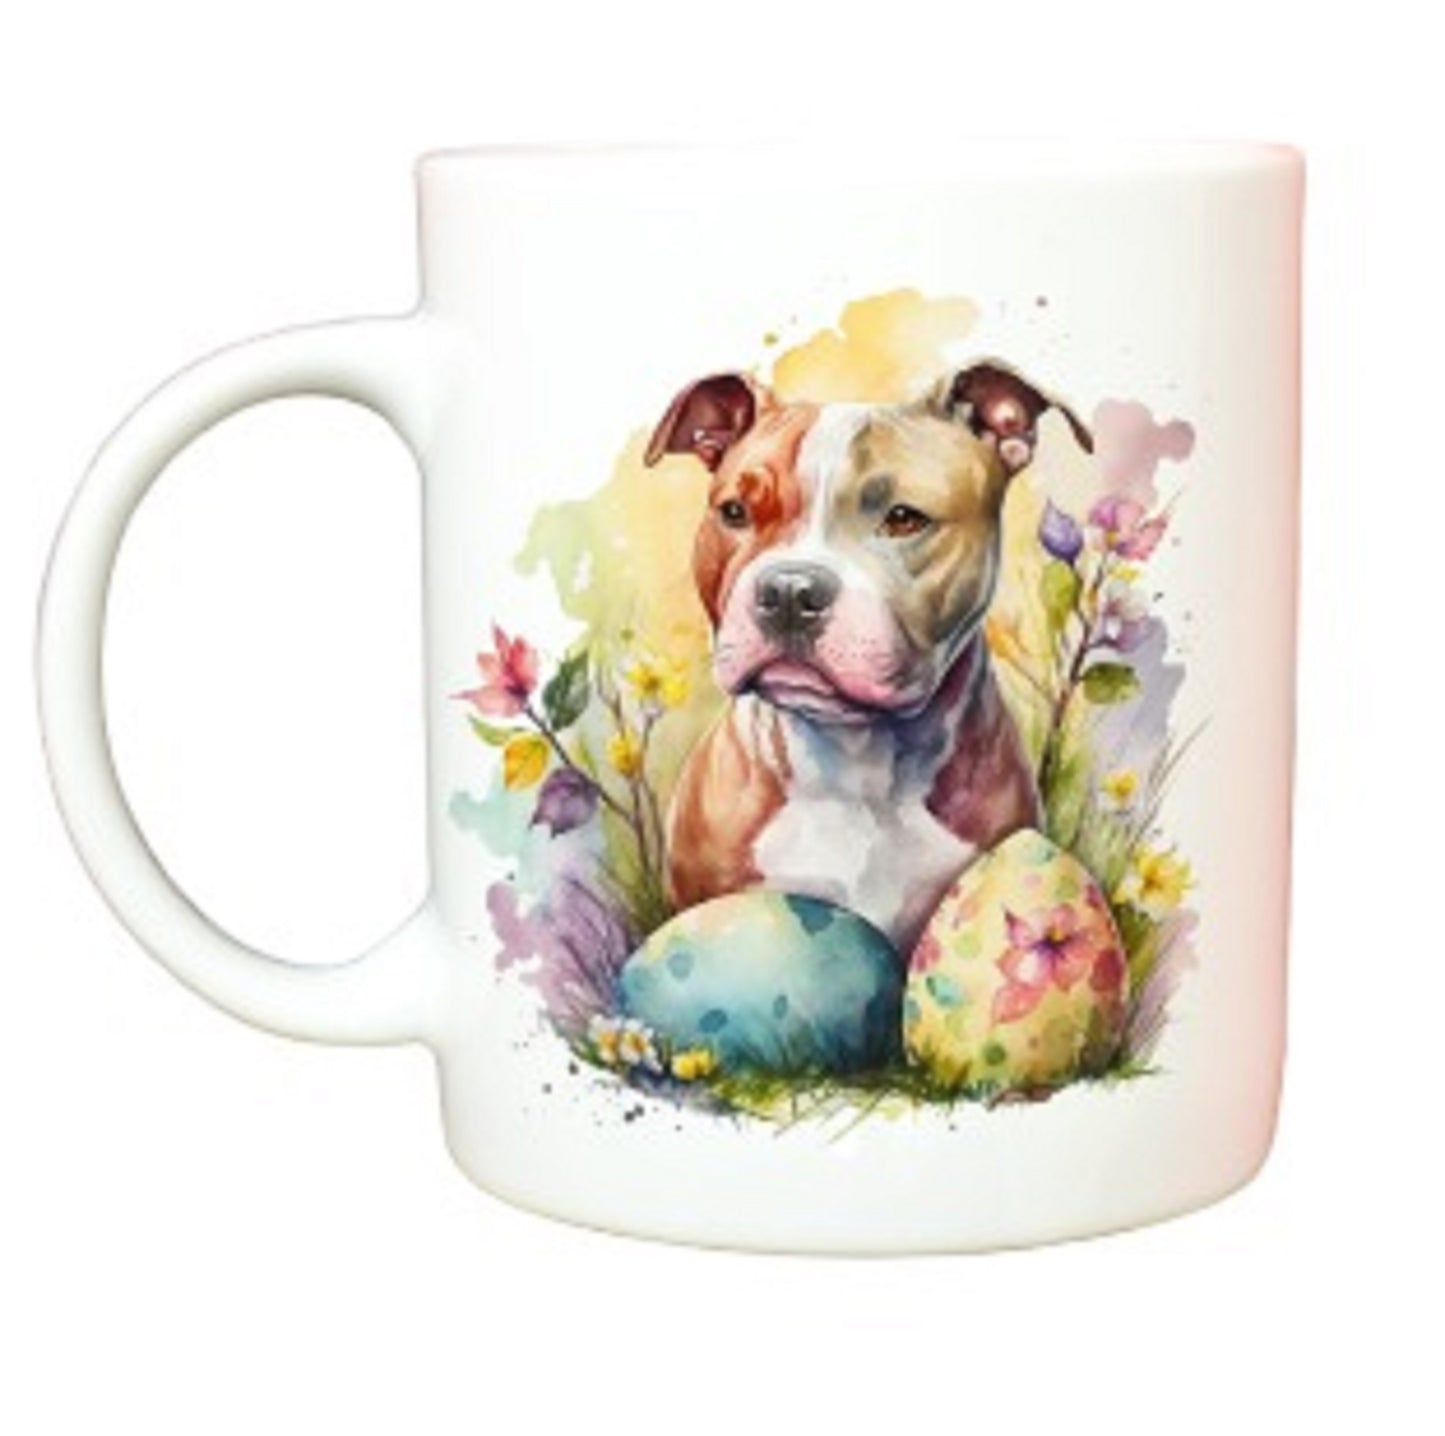  Easter Dog Mug in Various Breeds by Free Spirit Accessories sold by Free Spirit Accessories